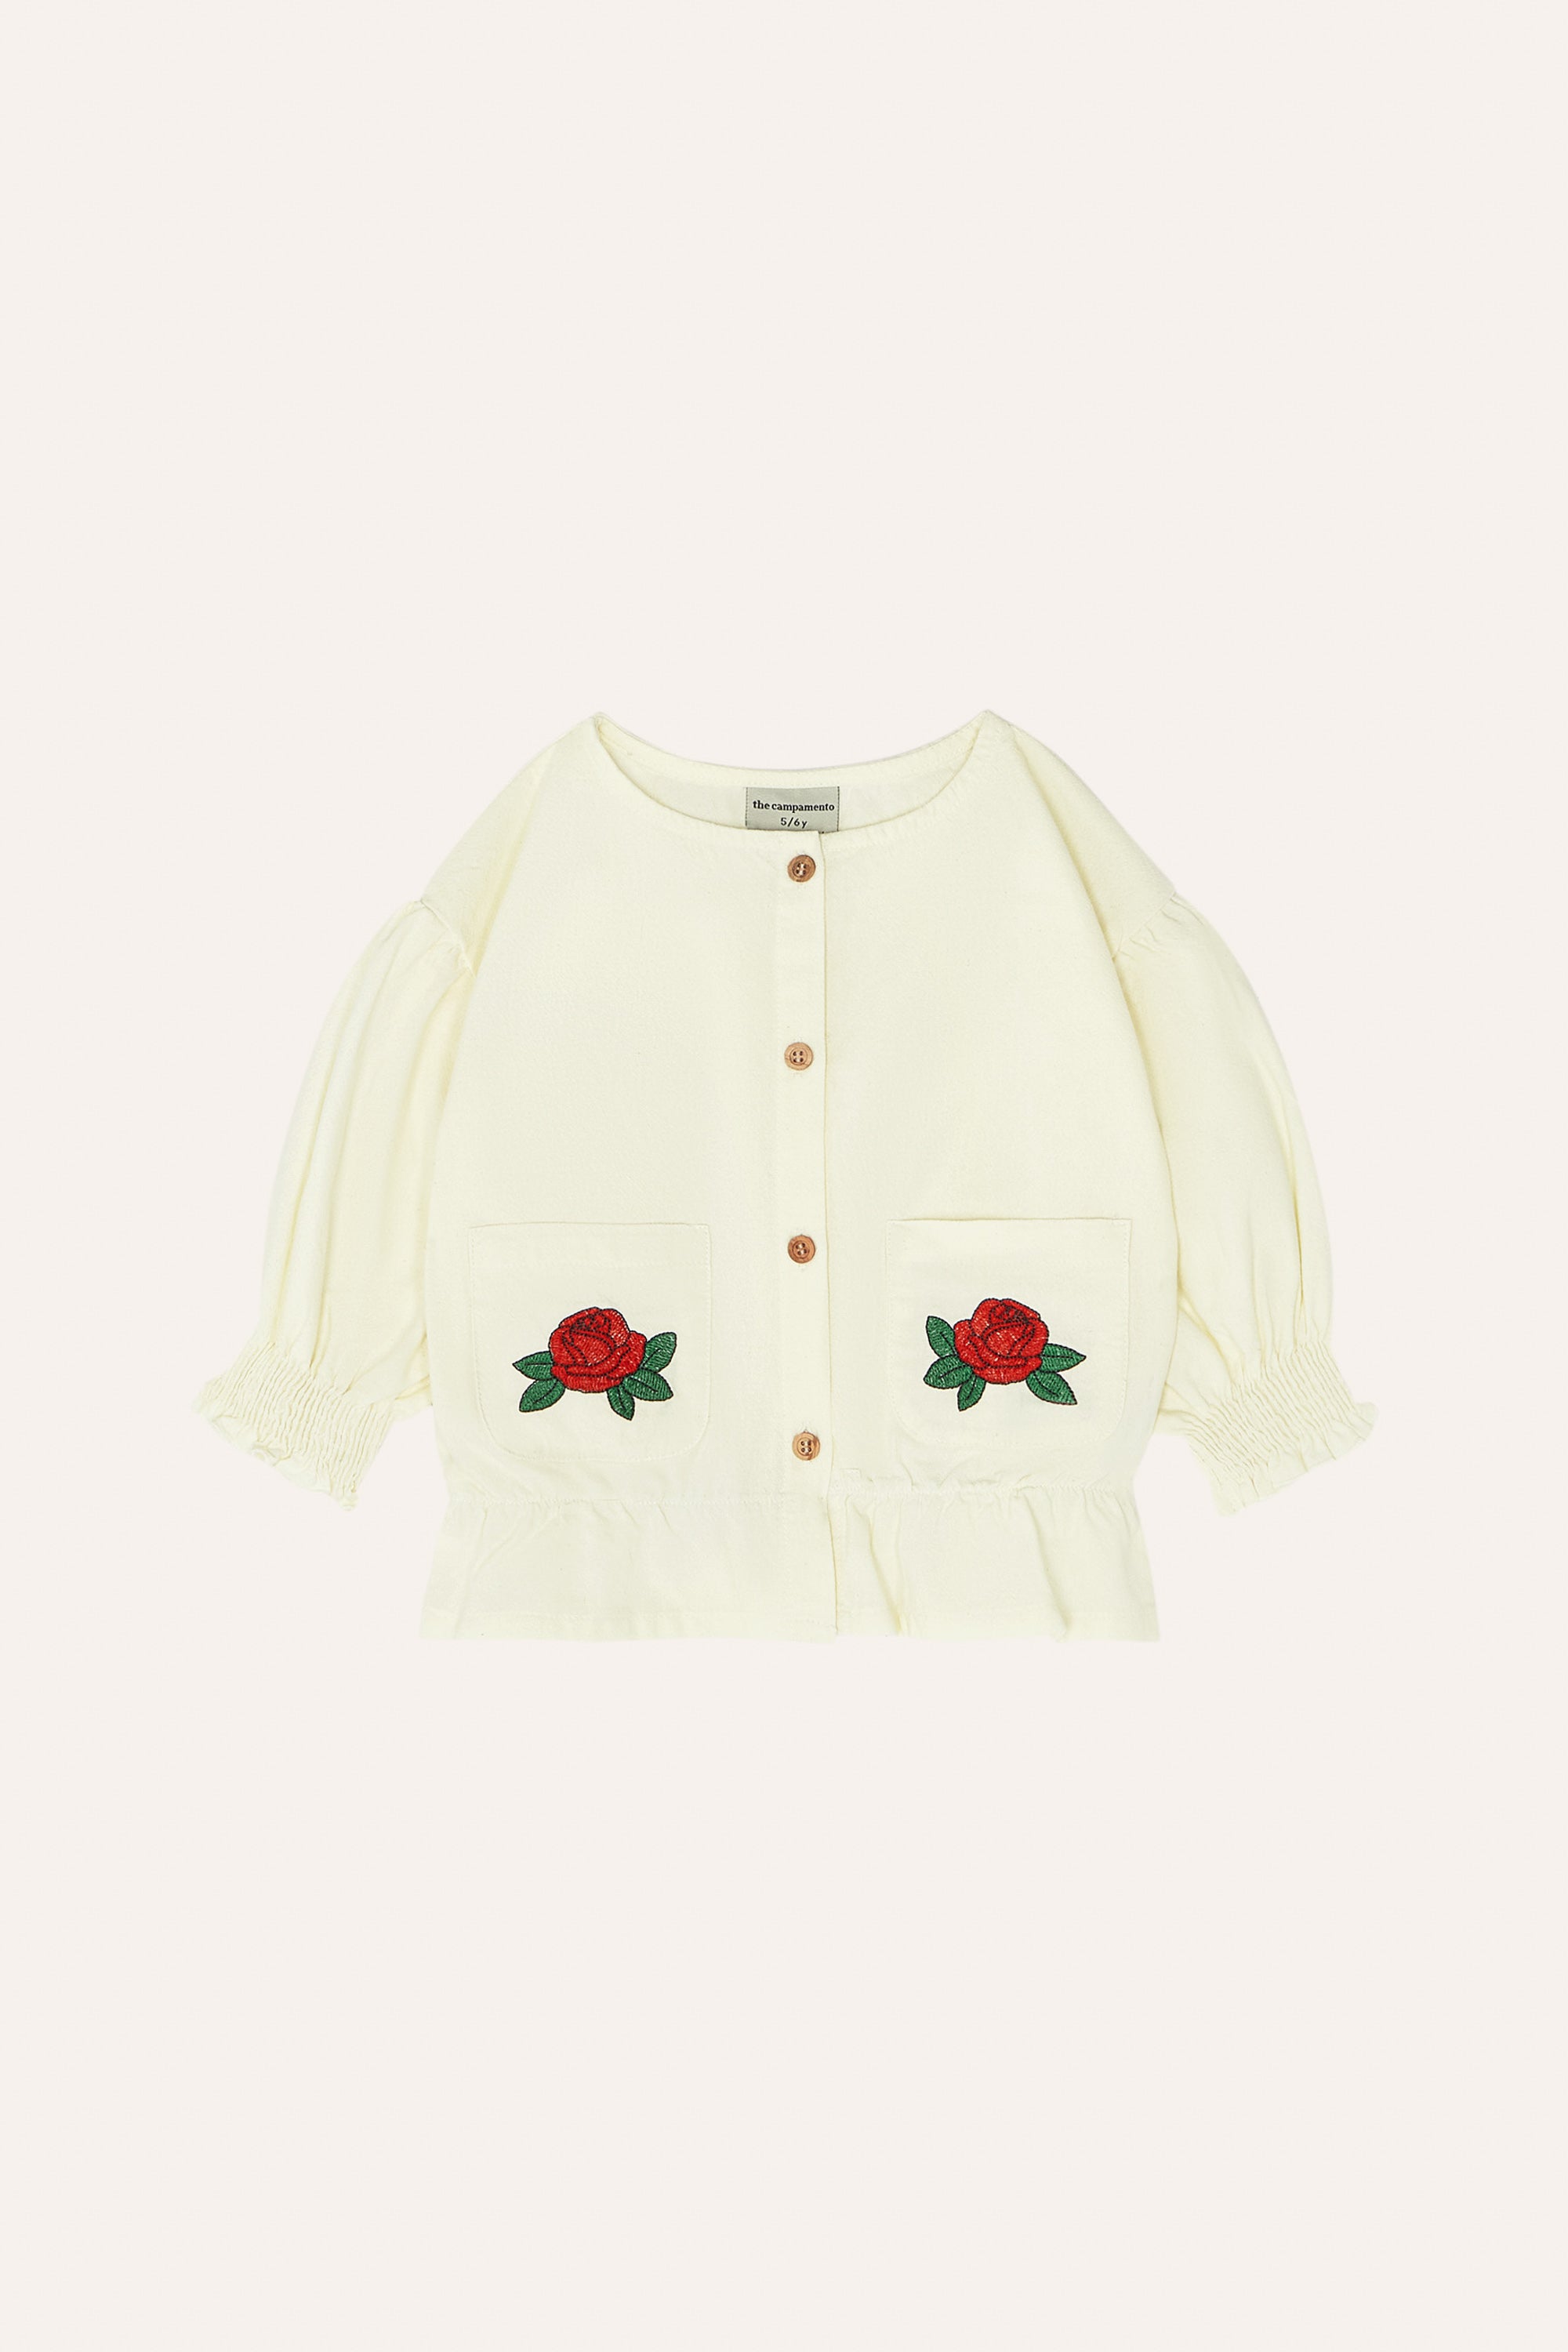 The Campamento - flowers embroidery blouse